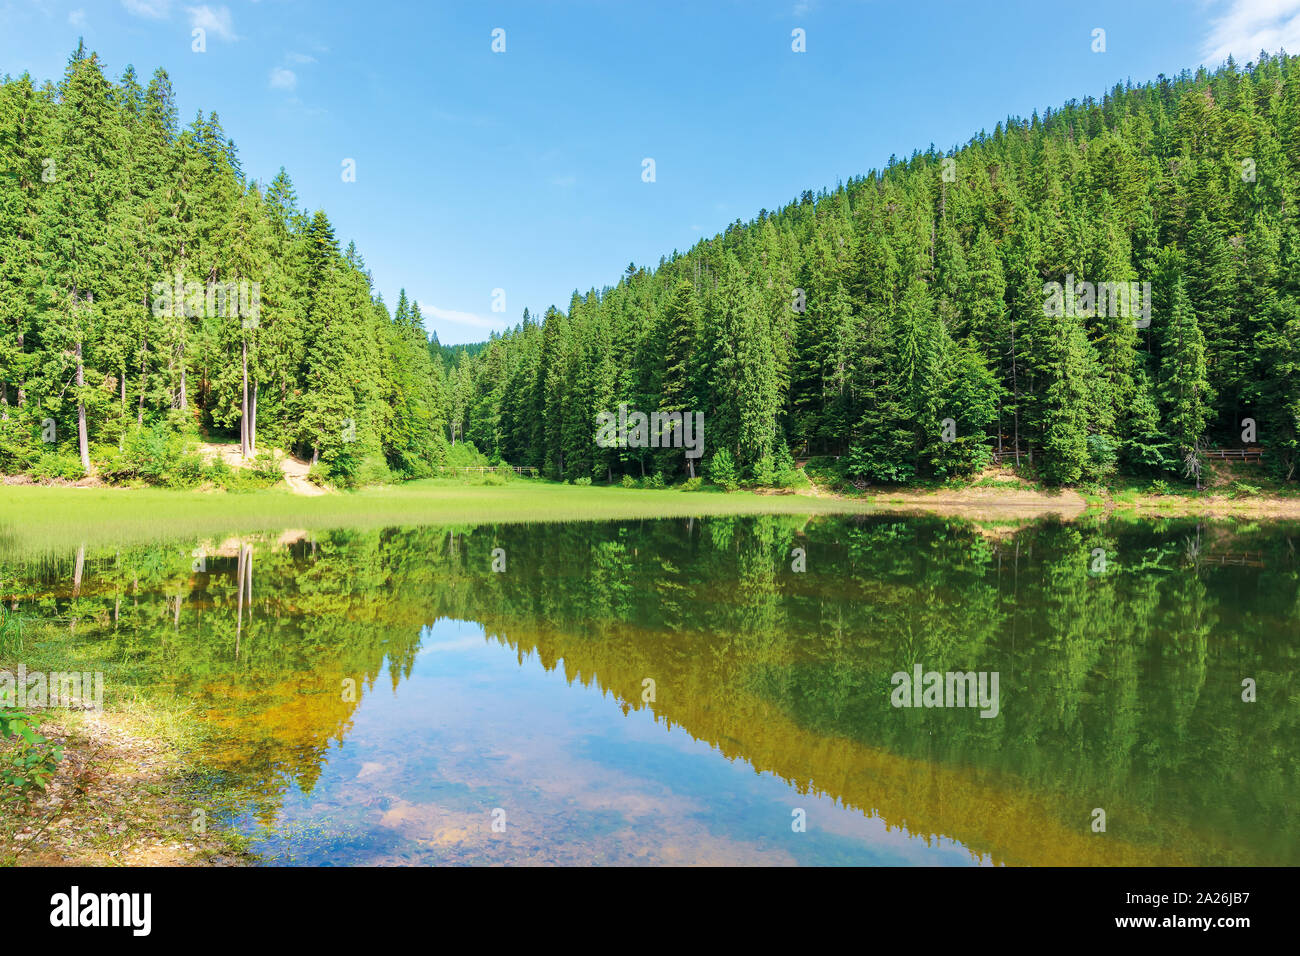 Beautiful Summer Landscape In Mountains Lake Among The Spruce Forest Wonderful Sunny Weather Scenery Reflecting In The Water Great View Of Green A Stock Photo Alamy